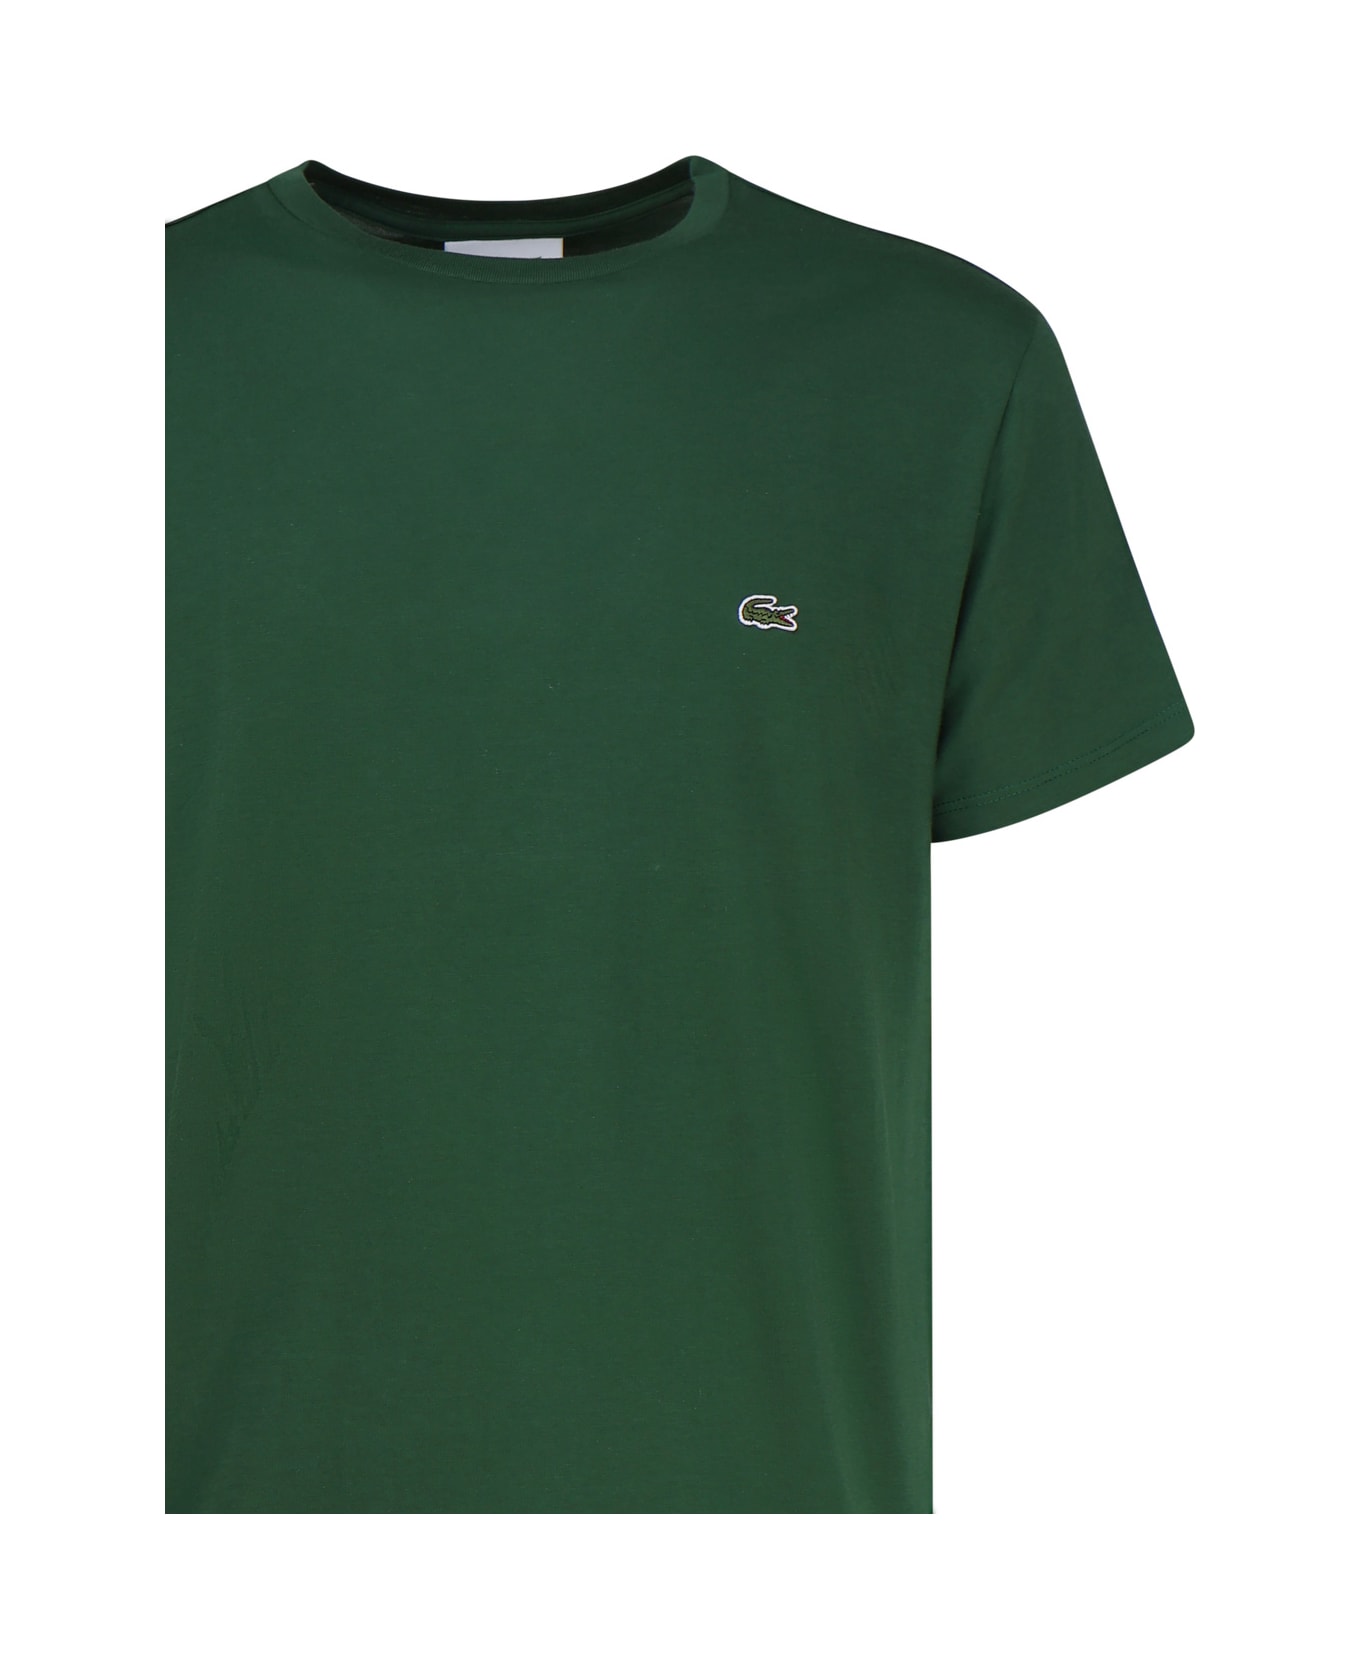 Lacoste Green T-shirt In Cotton Jersey - Verde